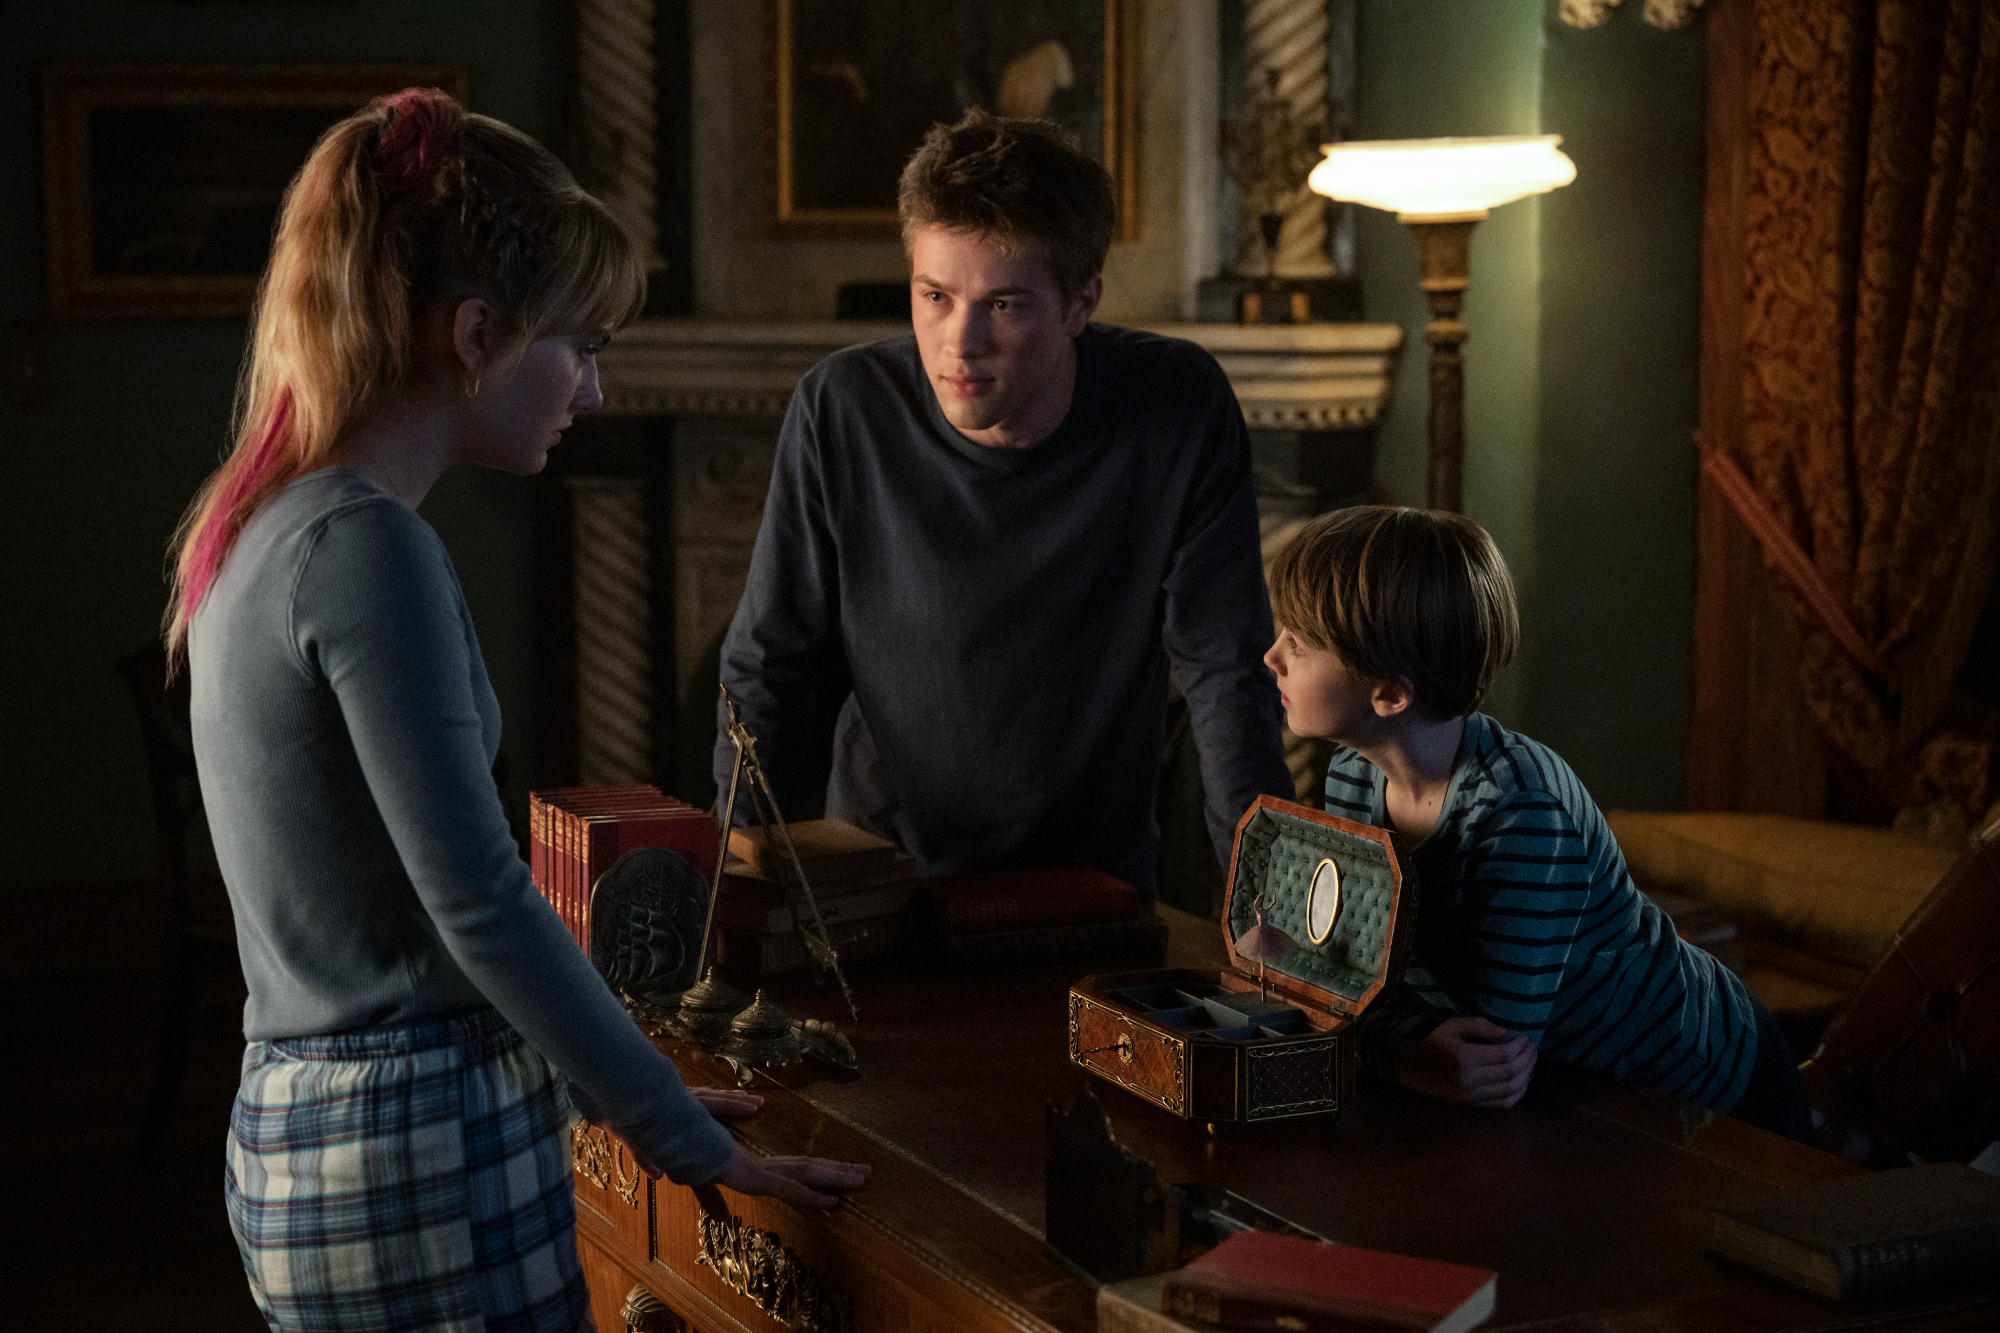 Emilia Jones, Connor Jessup, and Jackson Robert Scott in 'Locke & Key' Season 1. They're huddled over a desk, speaking. All three actors are returning for 'Locke & Key' Season 2 on Netflix, which has a release date of Oct. 22, 2021.